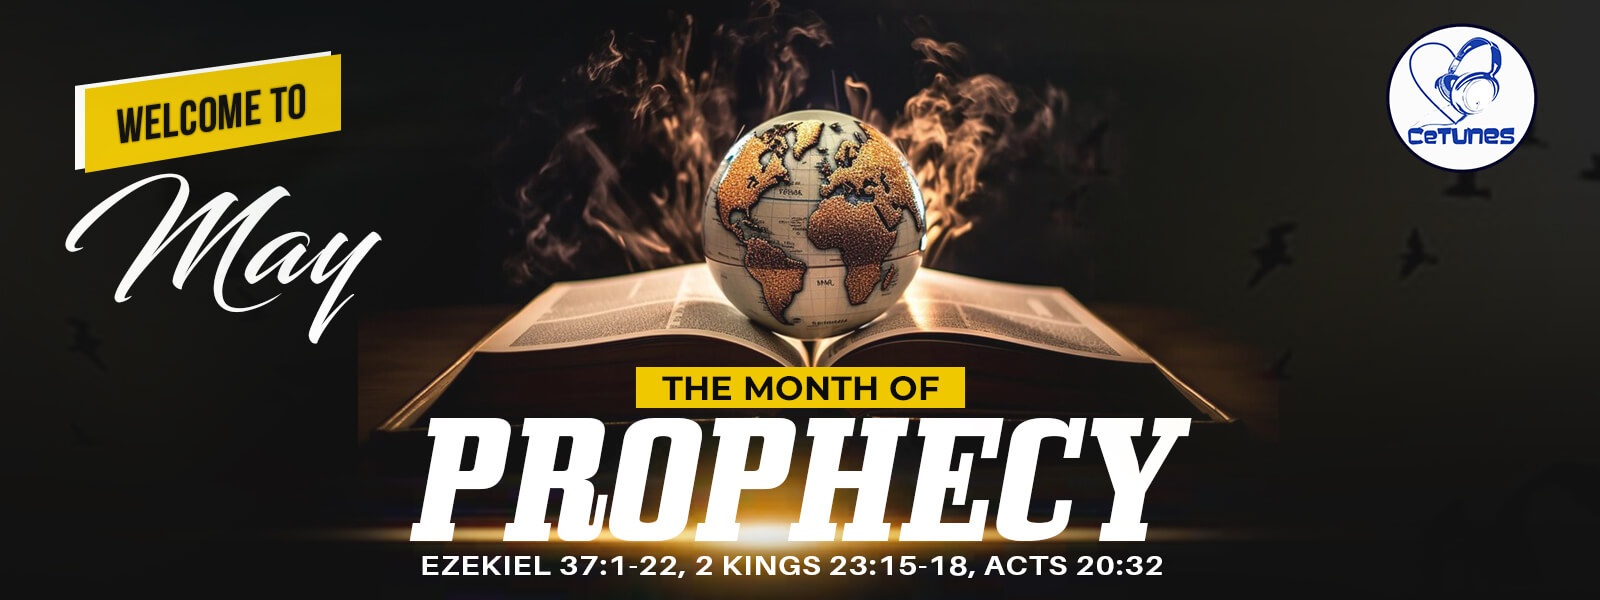 WELCOME TO MAY' THE MONTH OF PROPHECY 